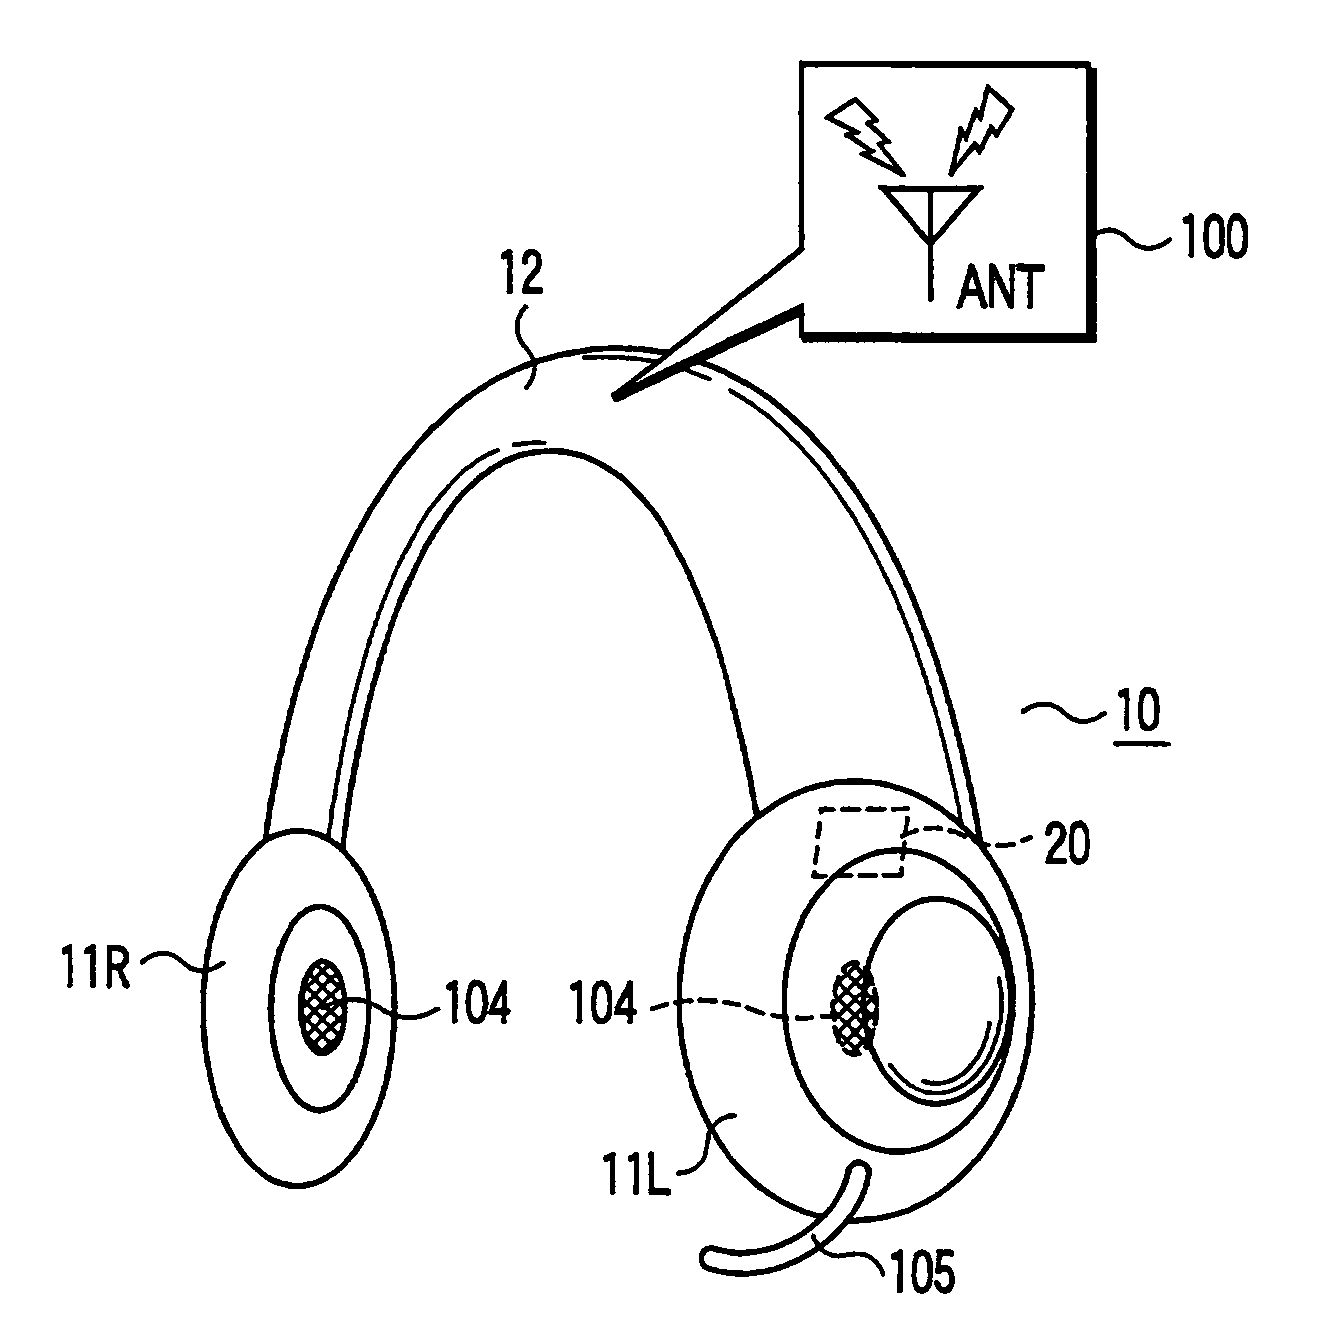 Communication apparatus with antenna